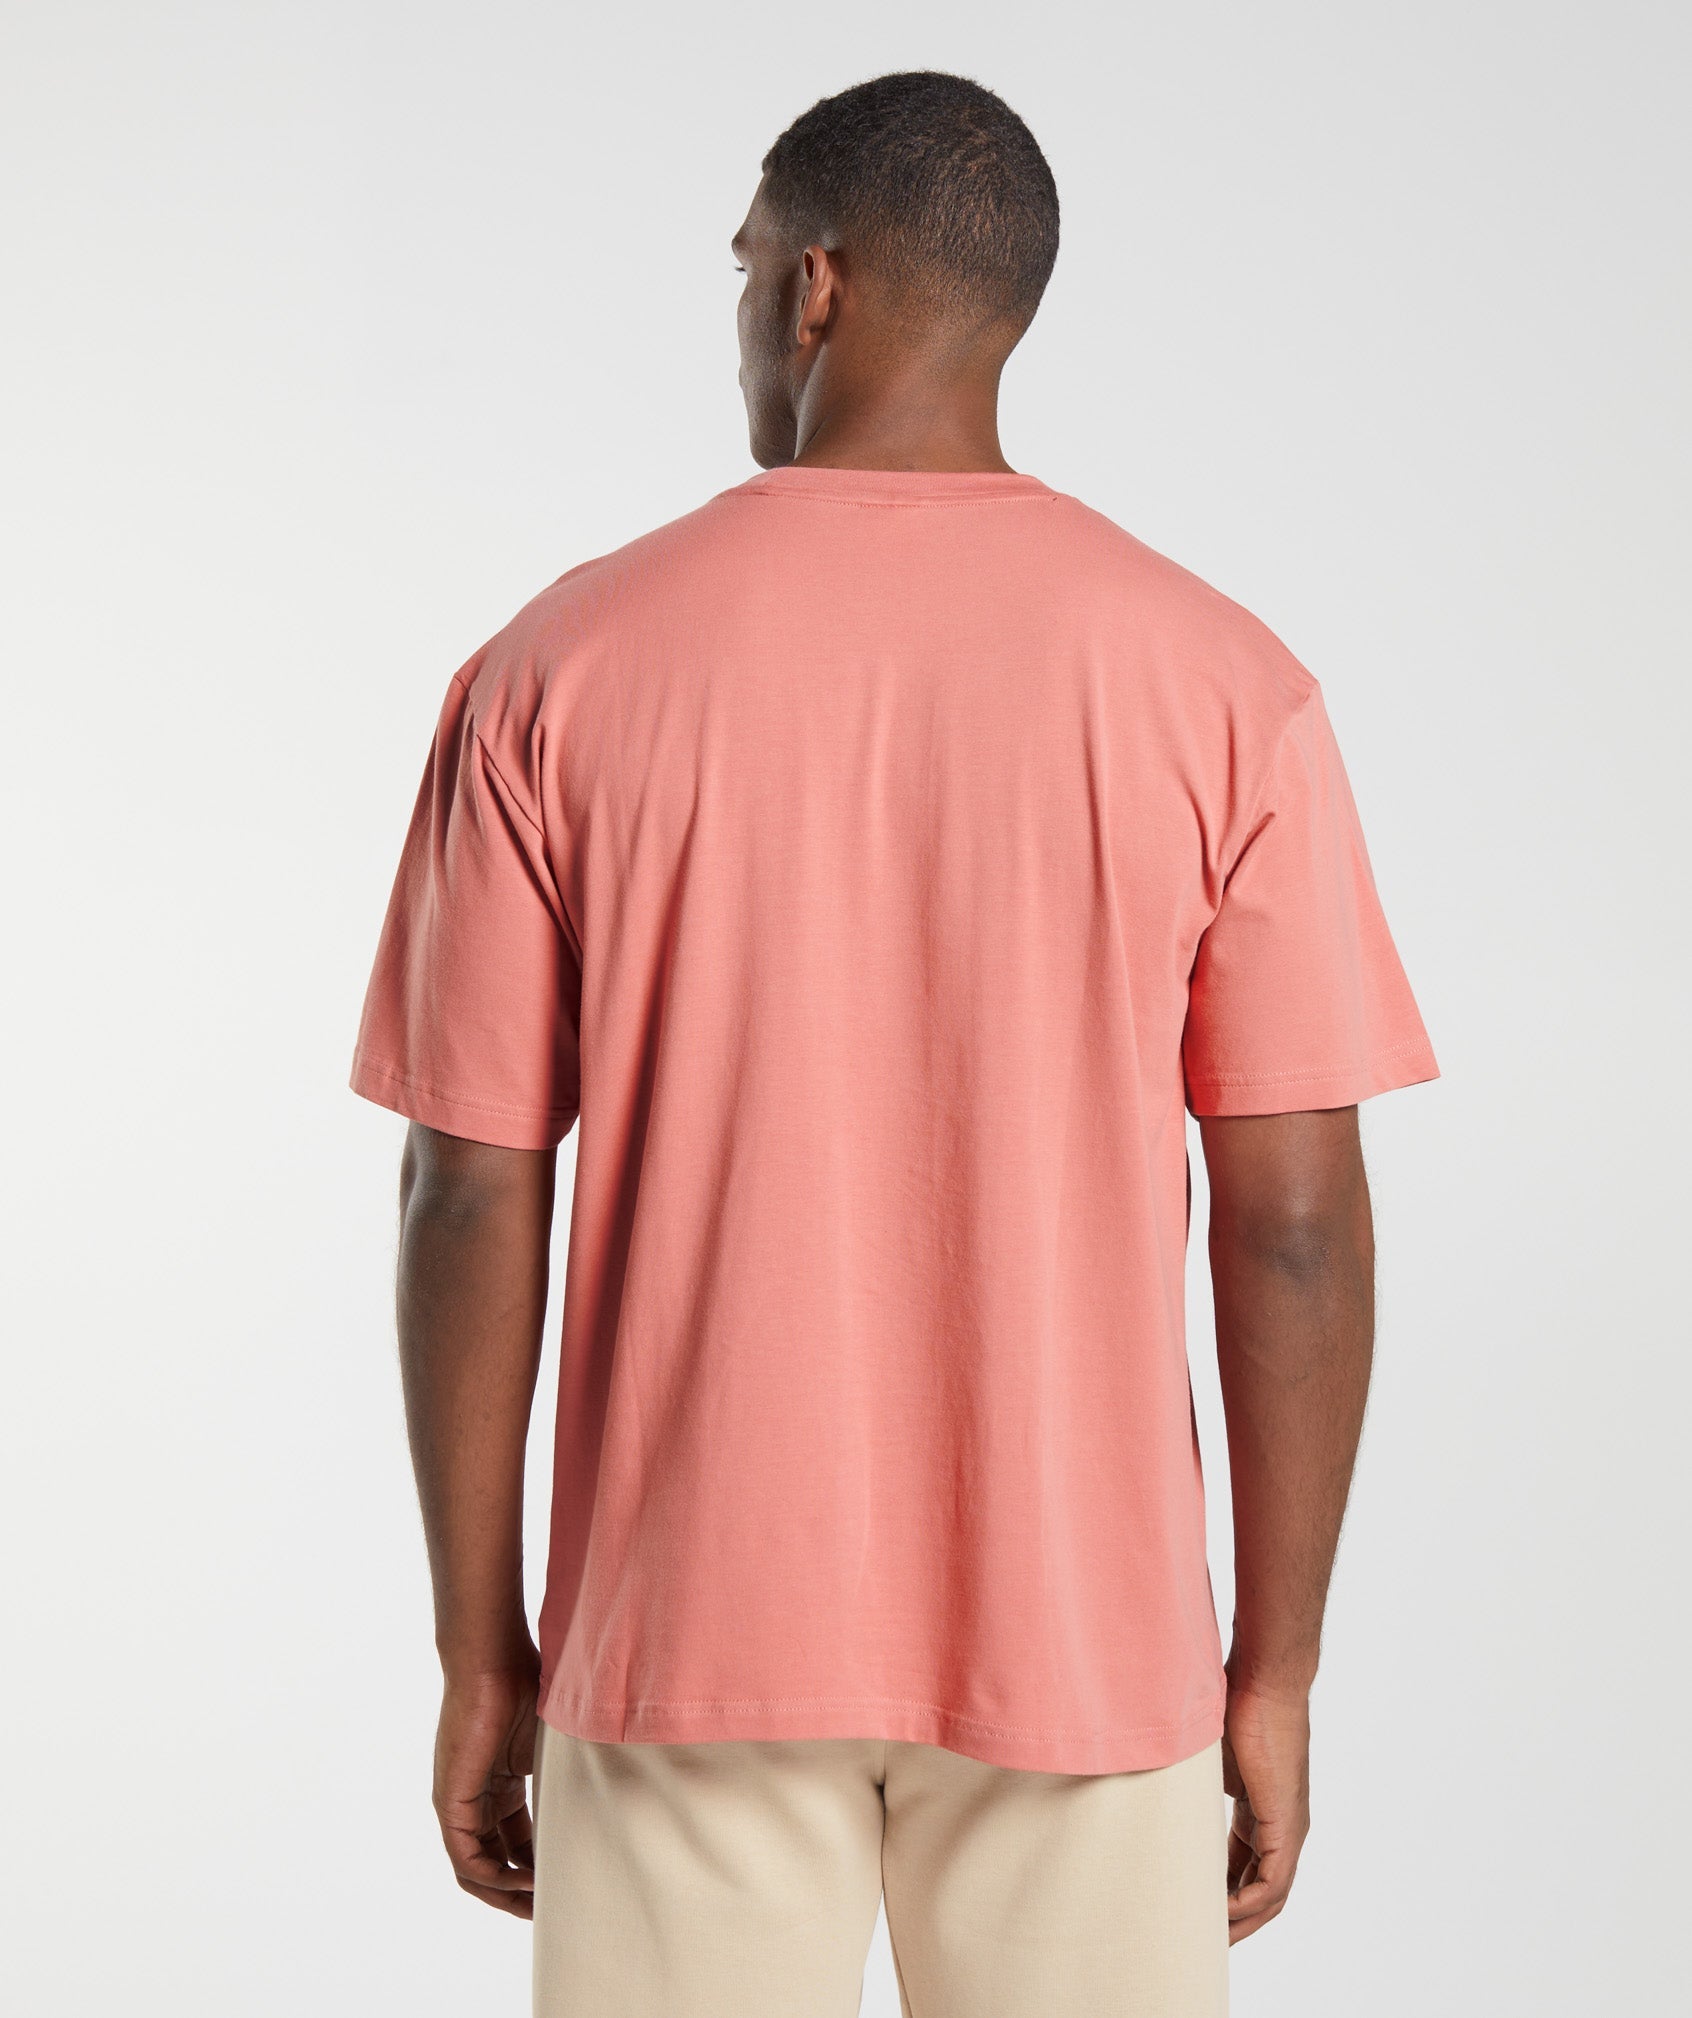 Essential Oversized T-Shirt in Terracotta Pink - view 2